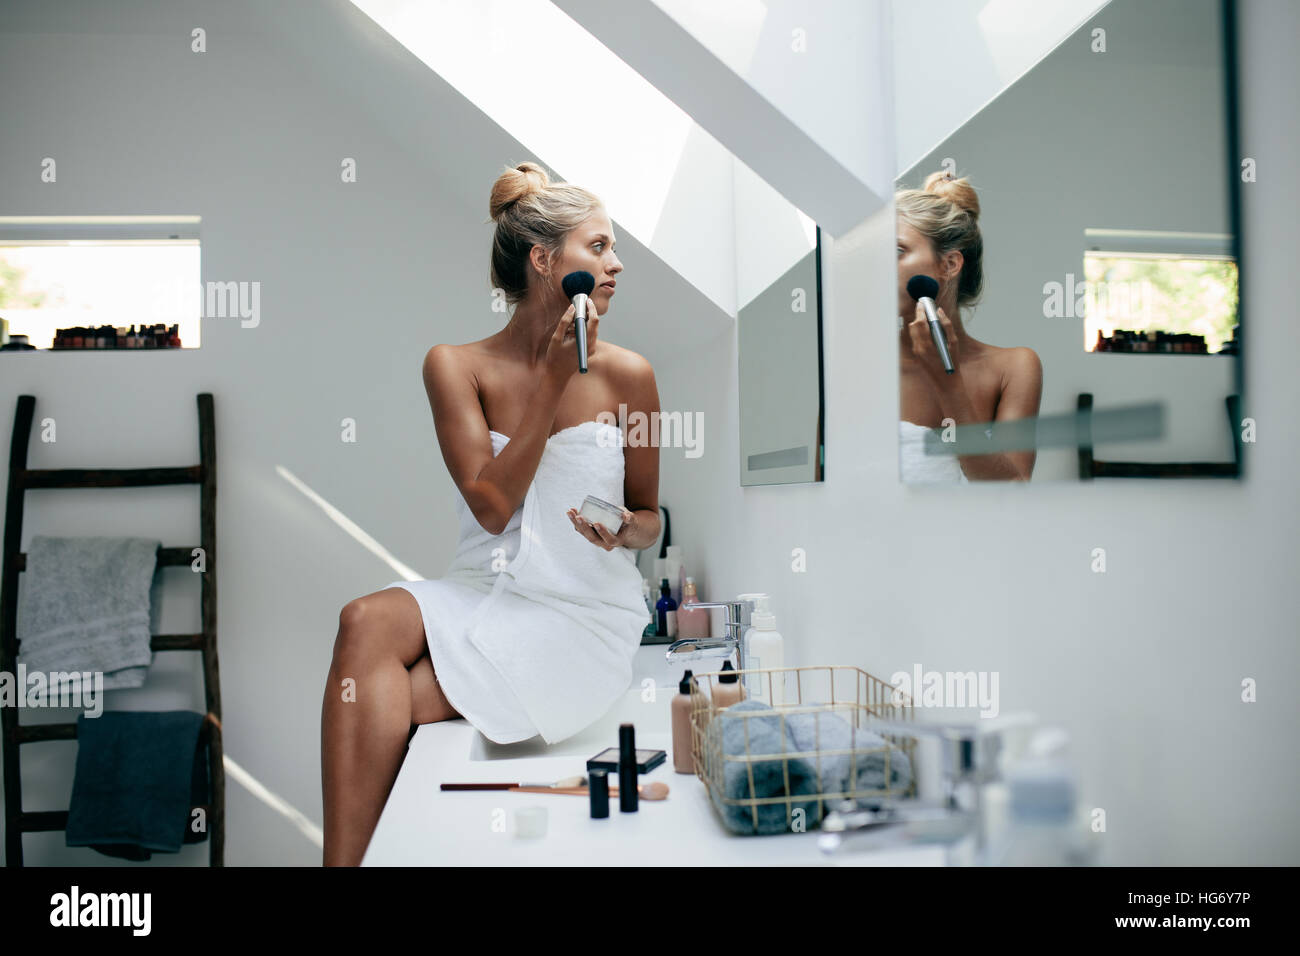 Young woman wrapped in towel with makeup brush looking to mirror at home bathroom and putting on makeup. Stock Photo